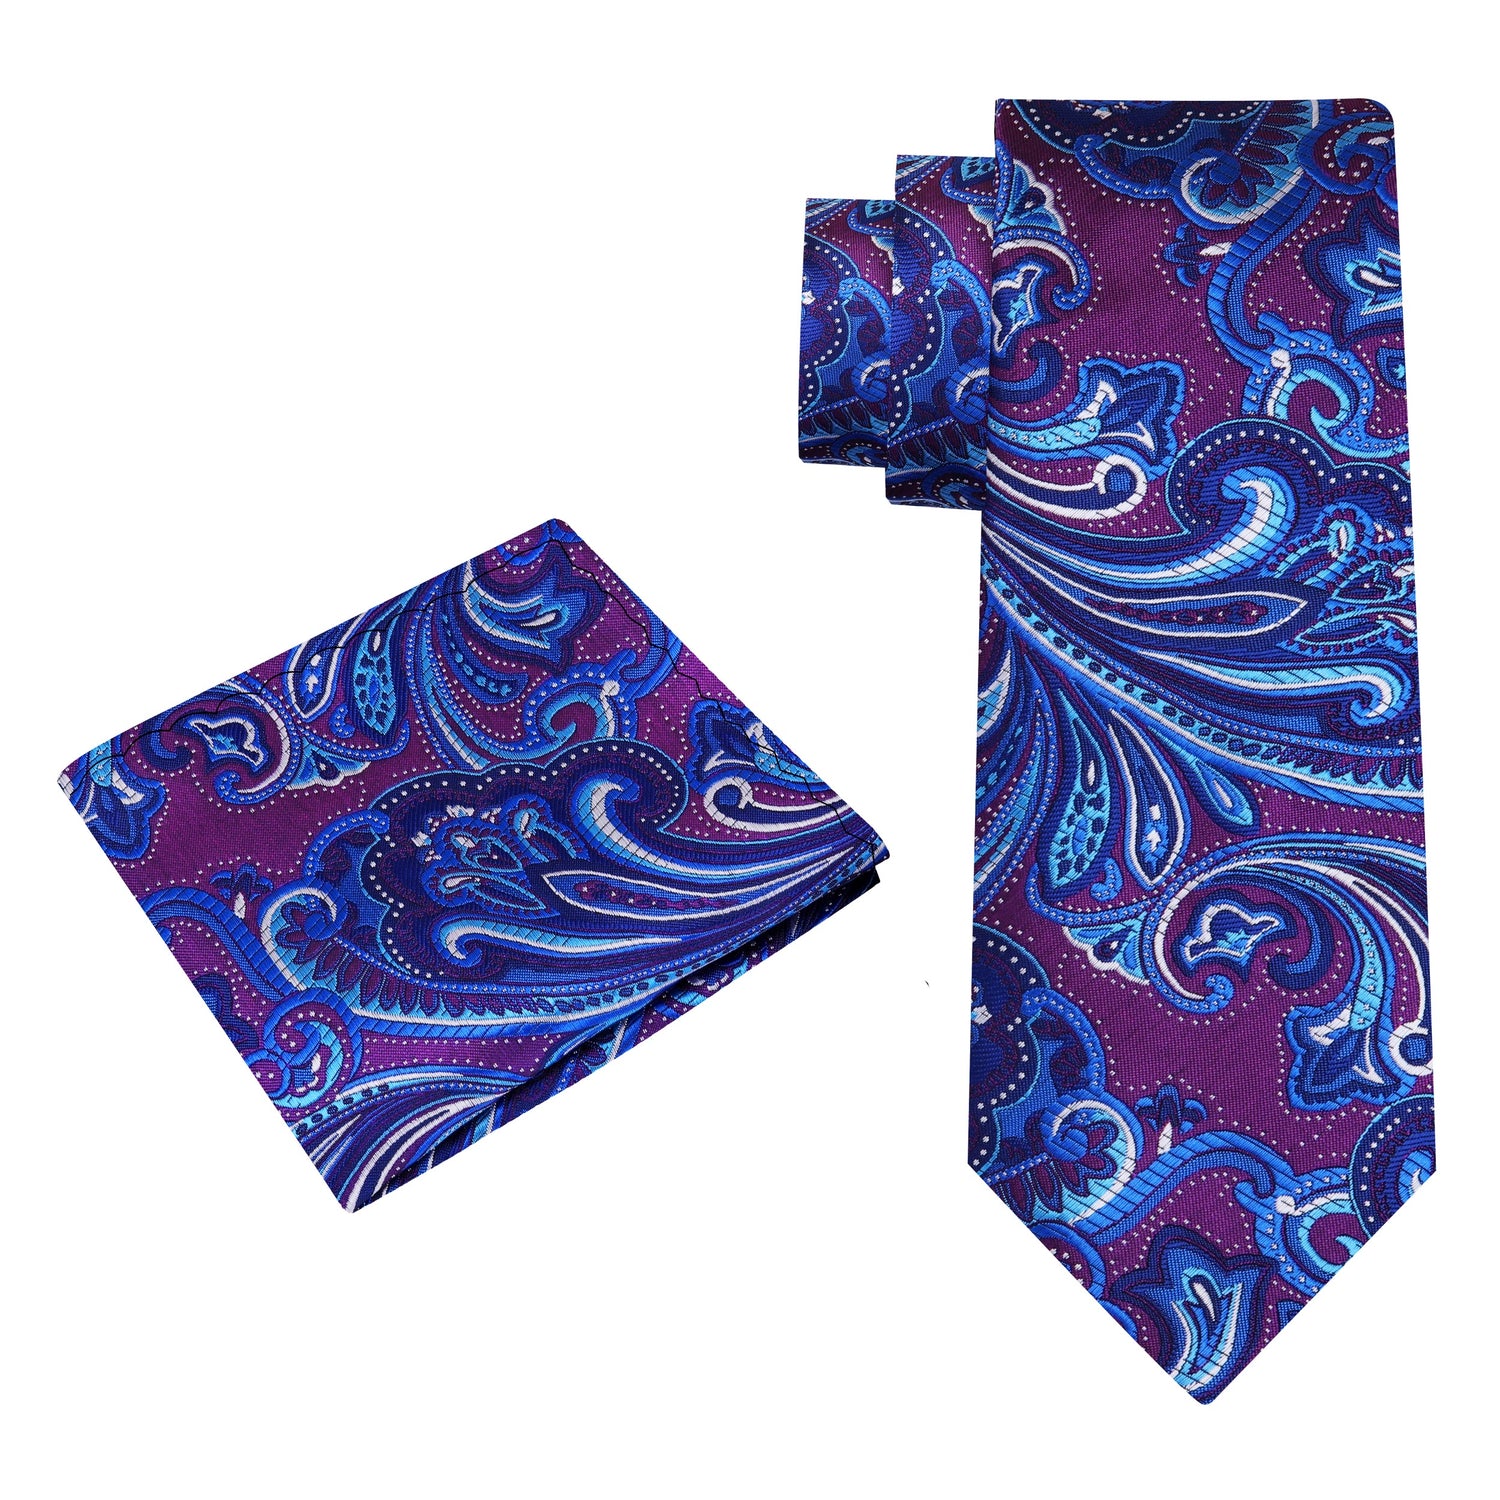 View 2: Purple, Blue Paisley Tie and Square